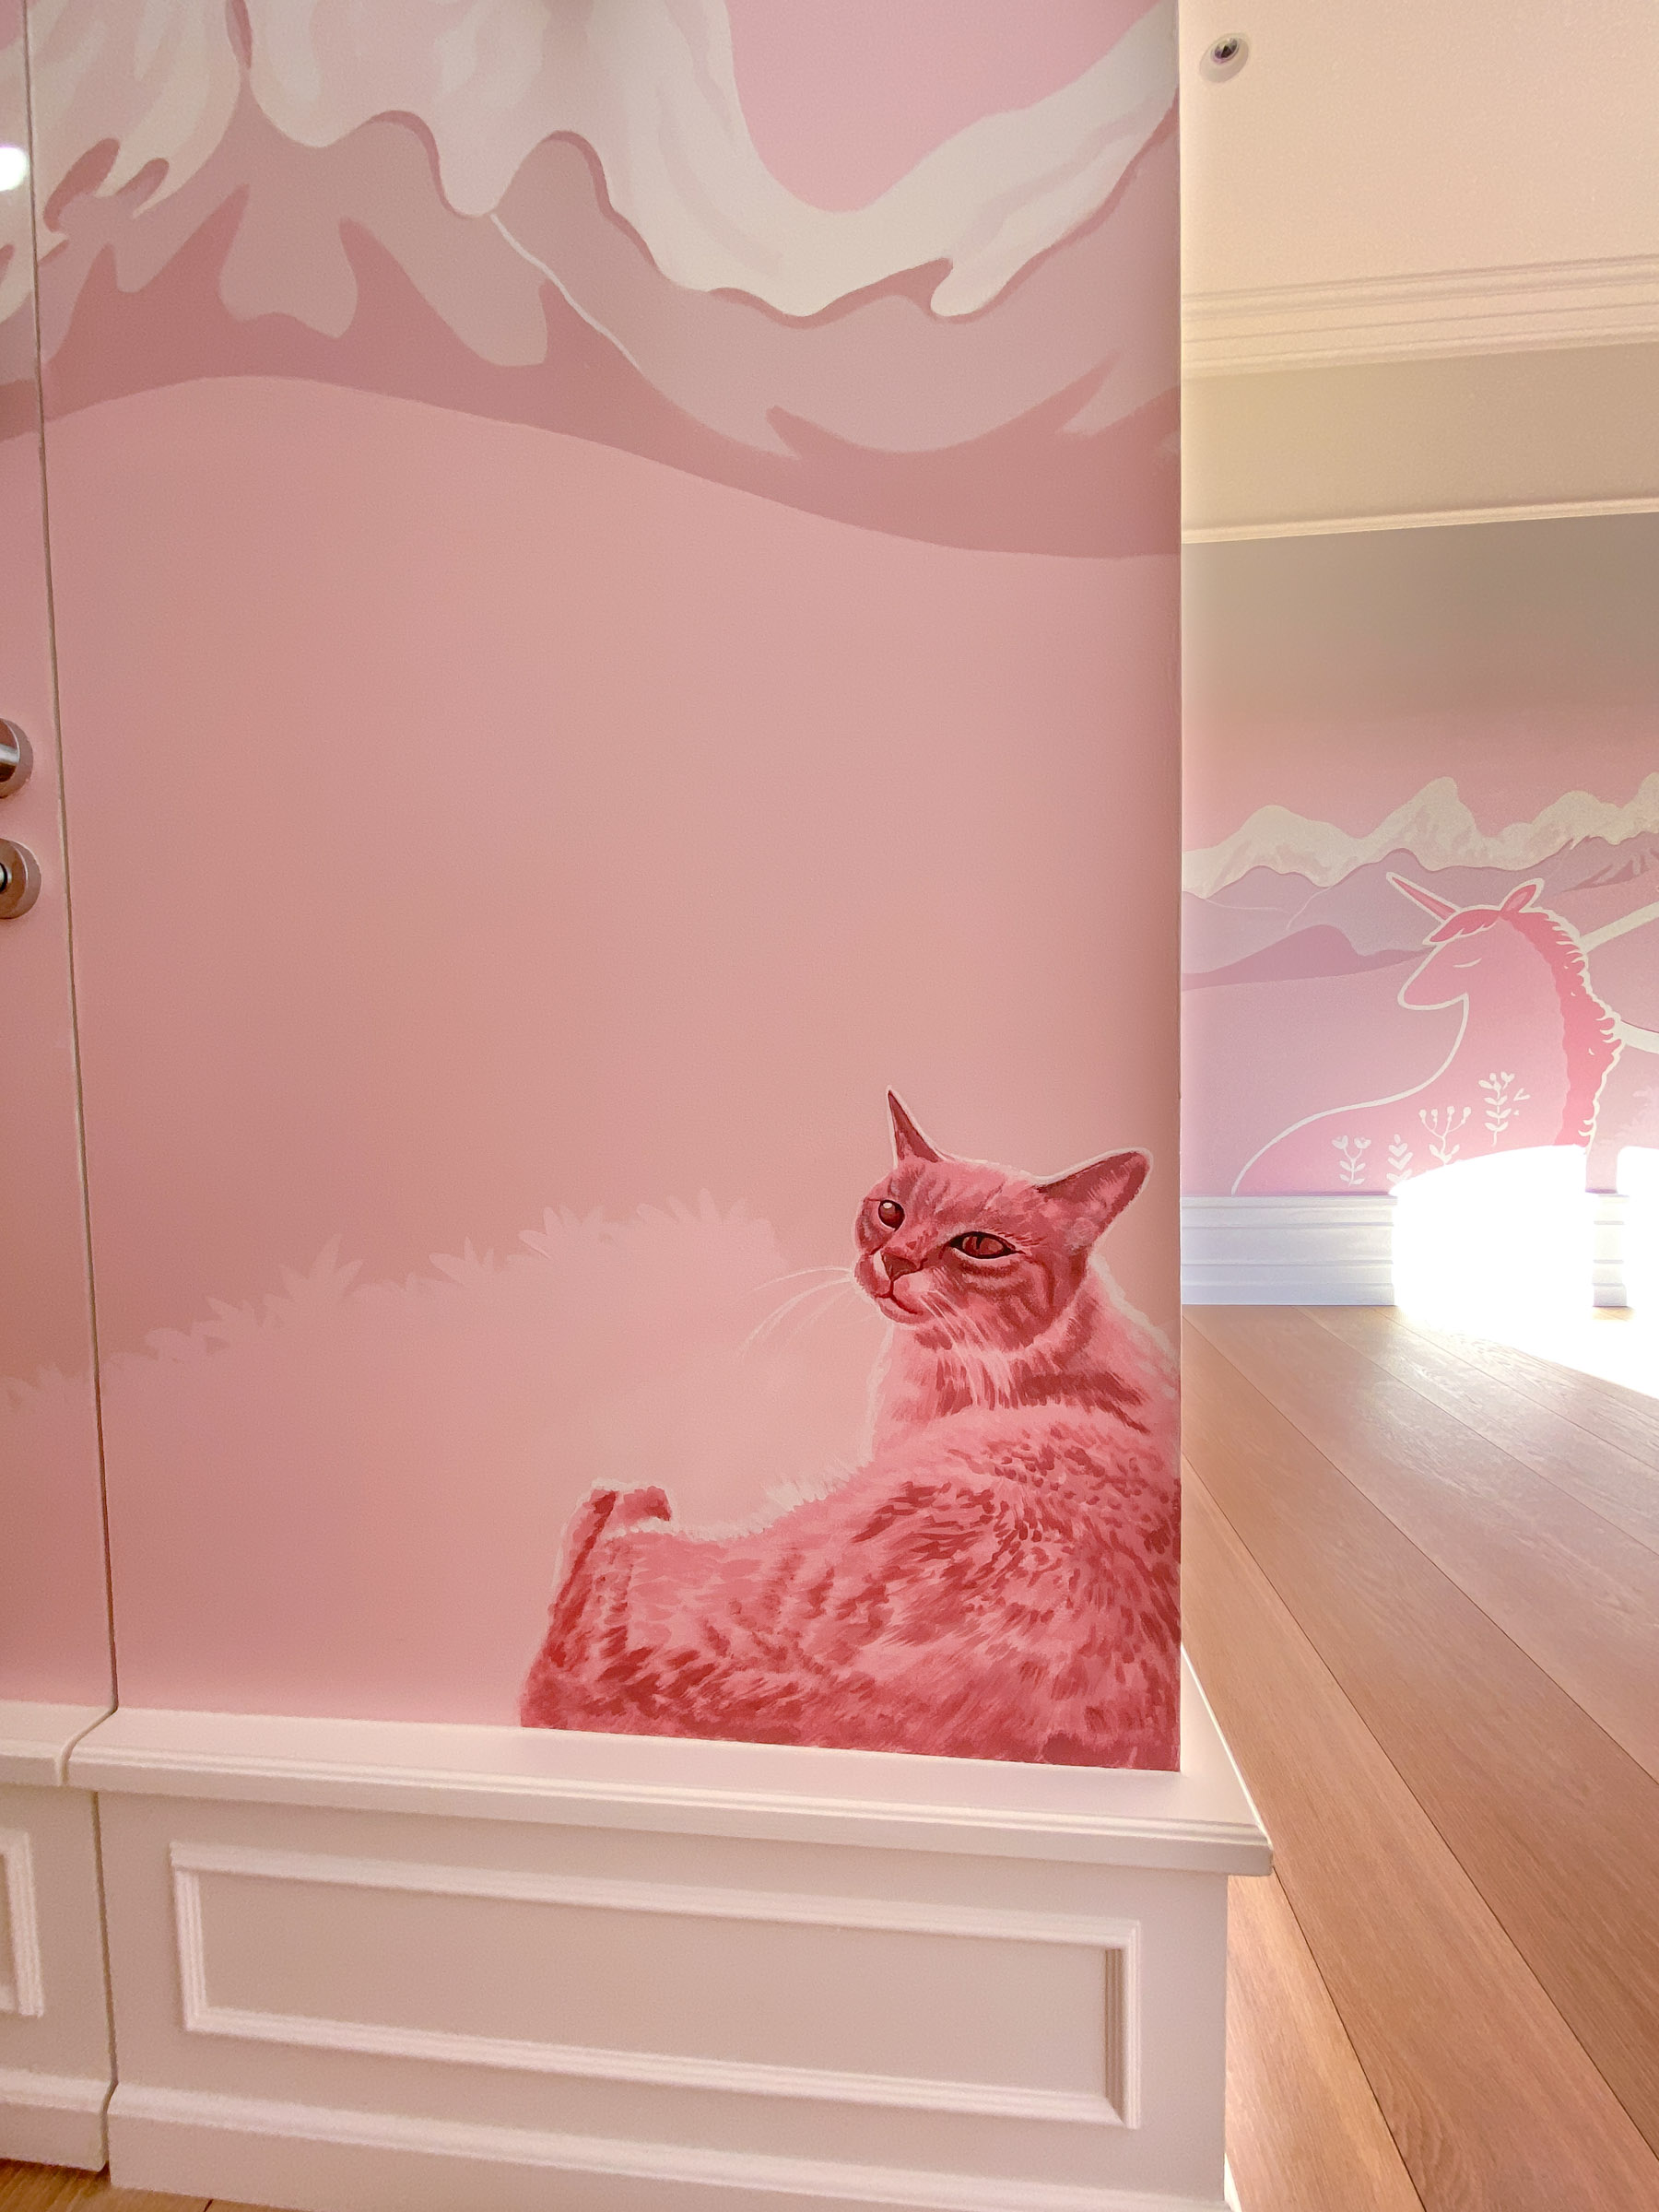 Pink Bedroom Mural. One of their cats was quite feisty!